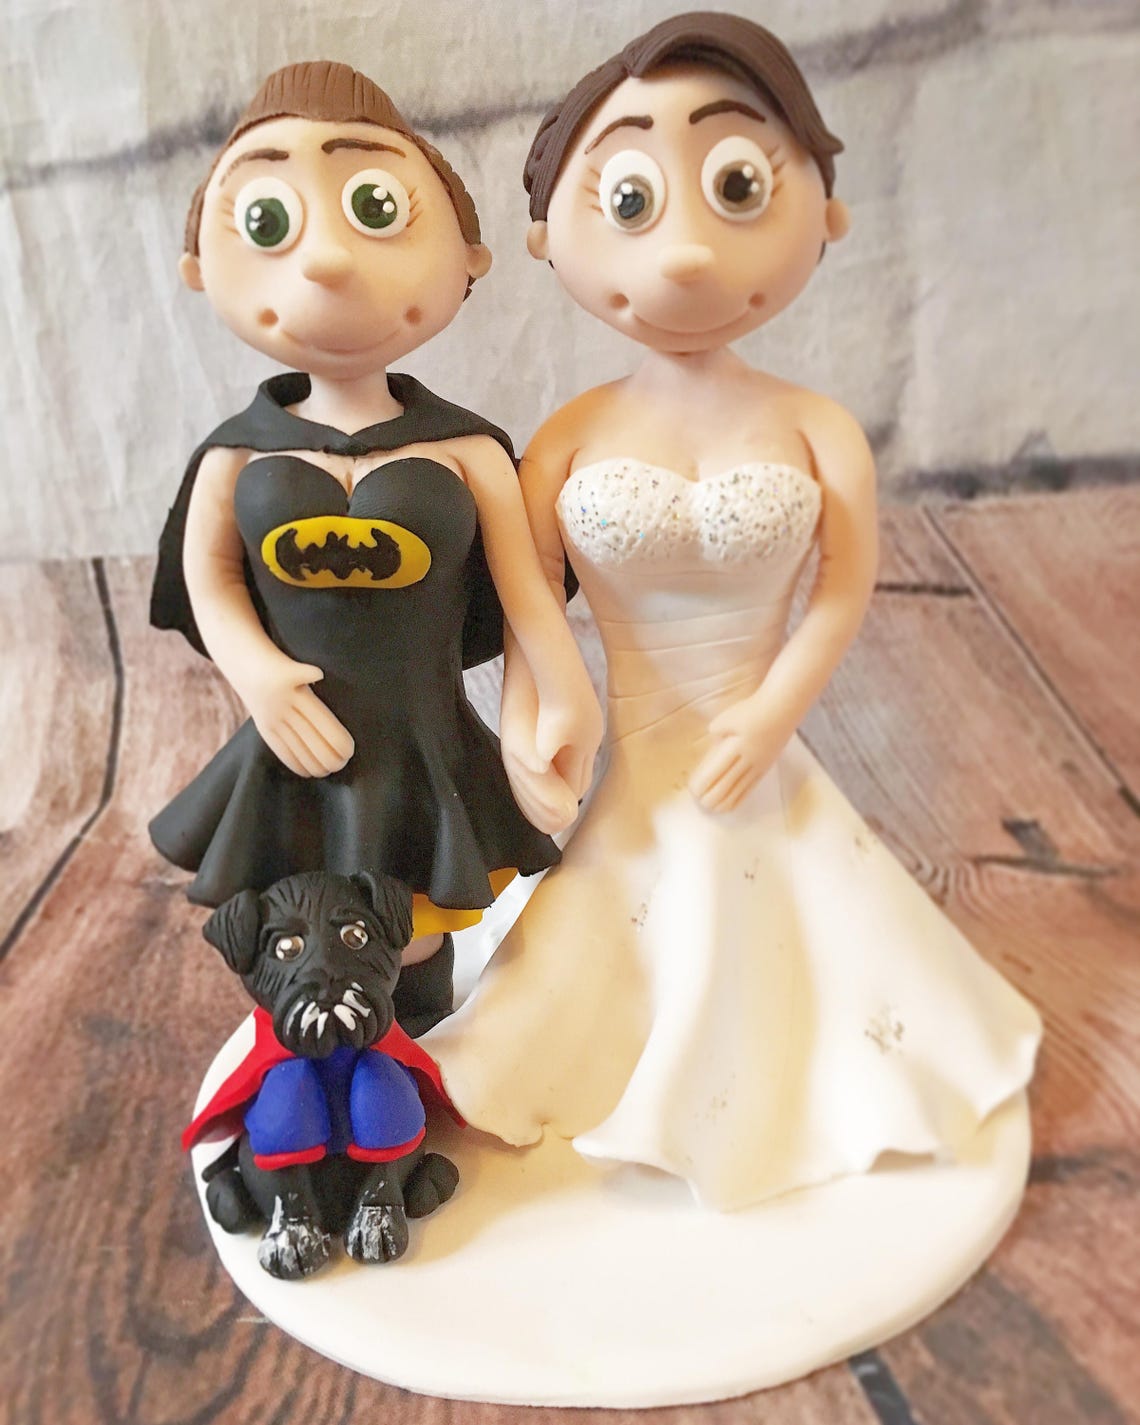 Wedding Cake Topper With Two Brides Etsy